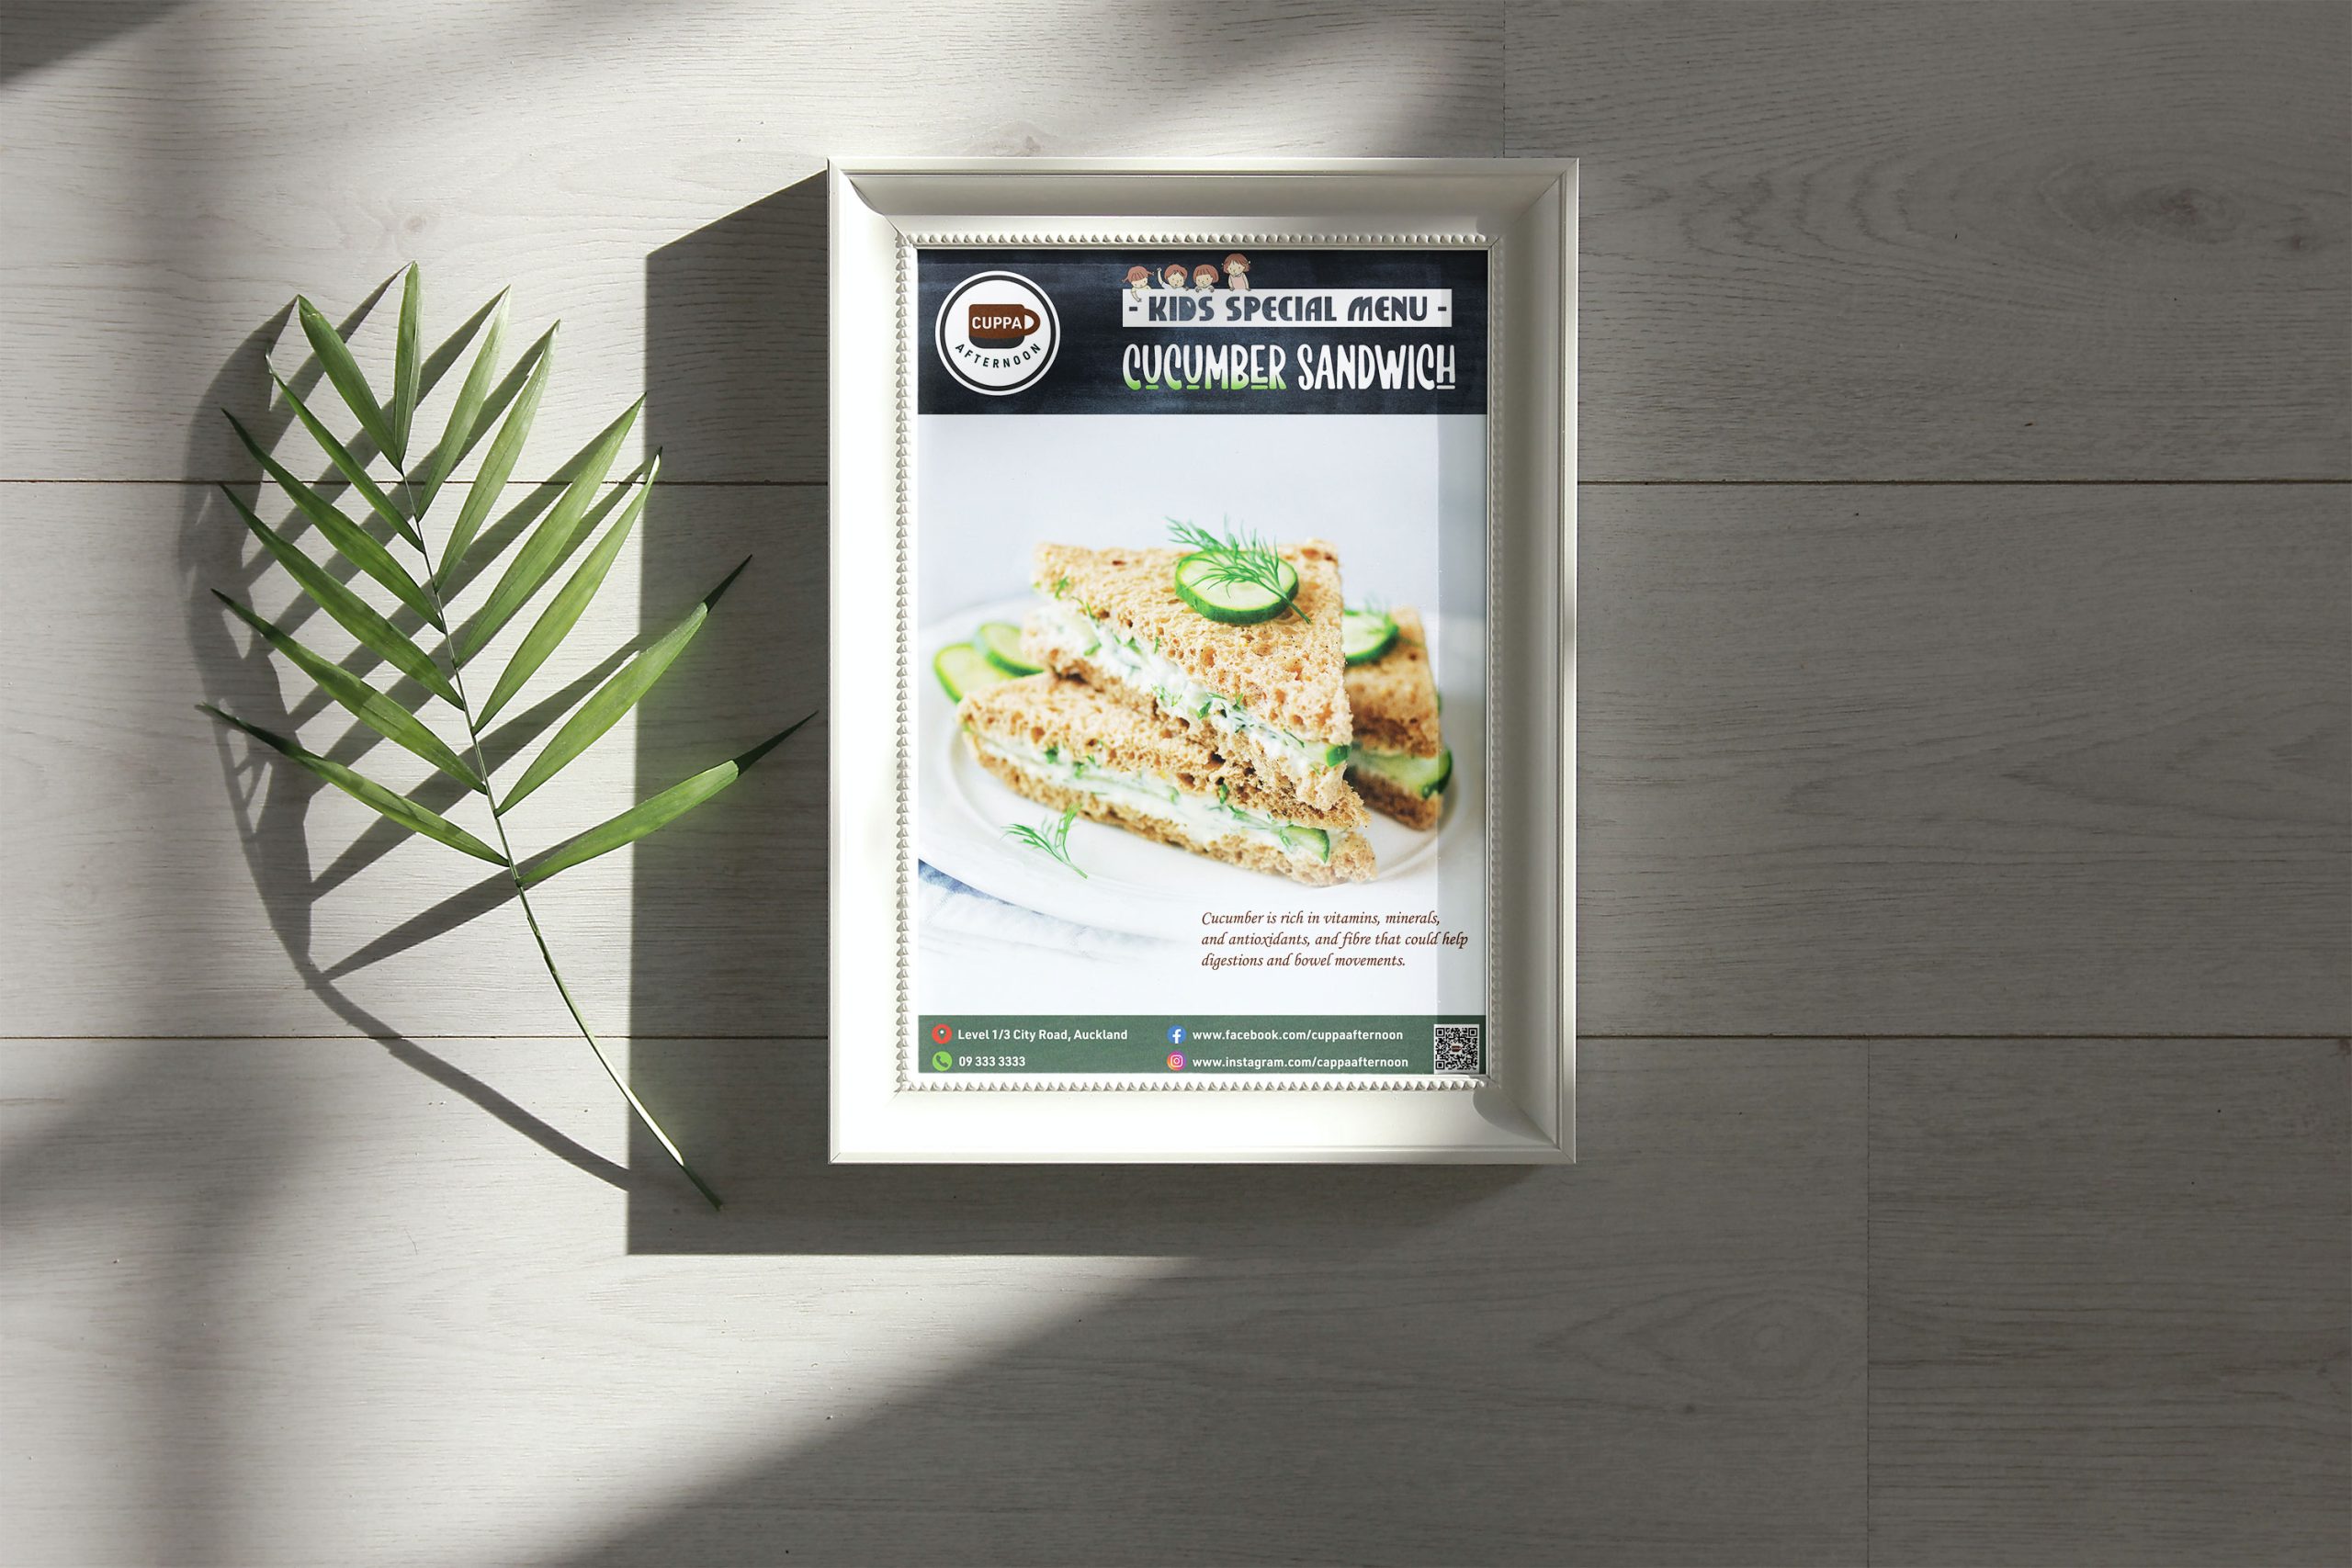 Sandwich Poster Mockup on the wall